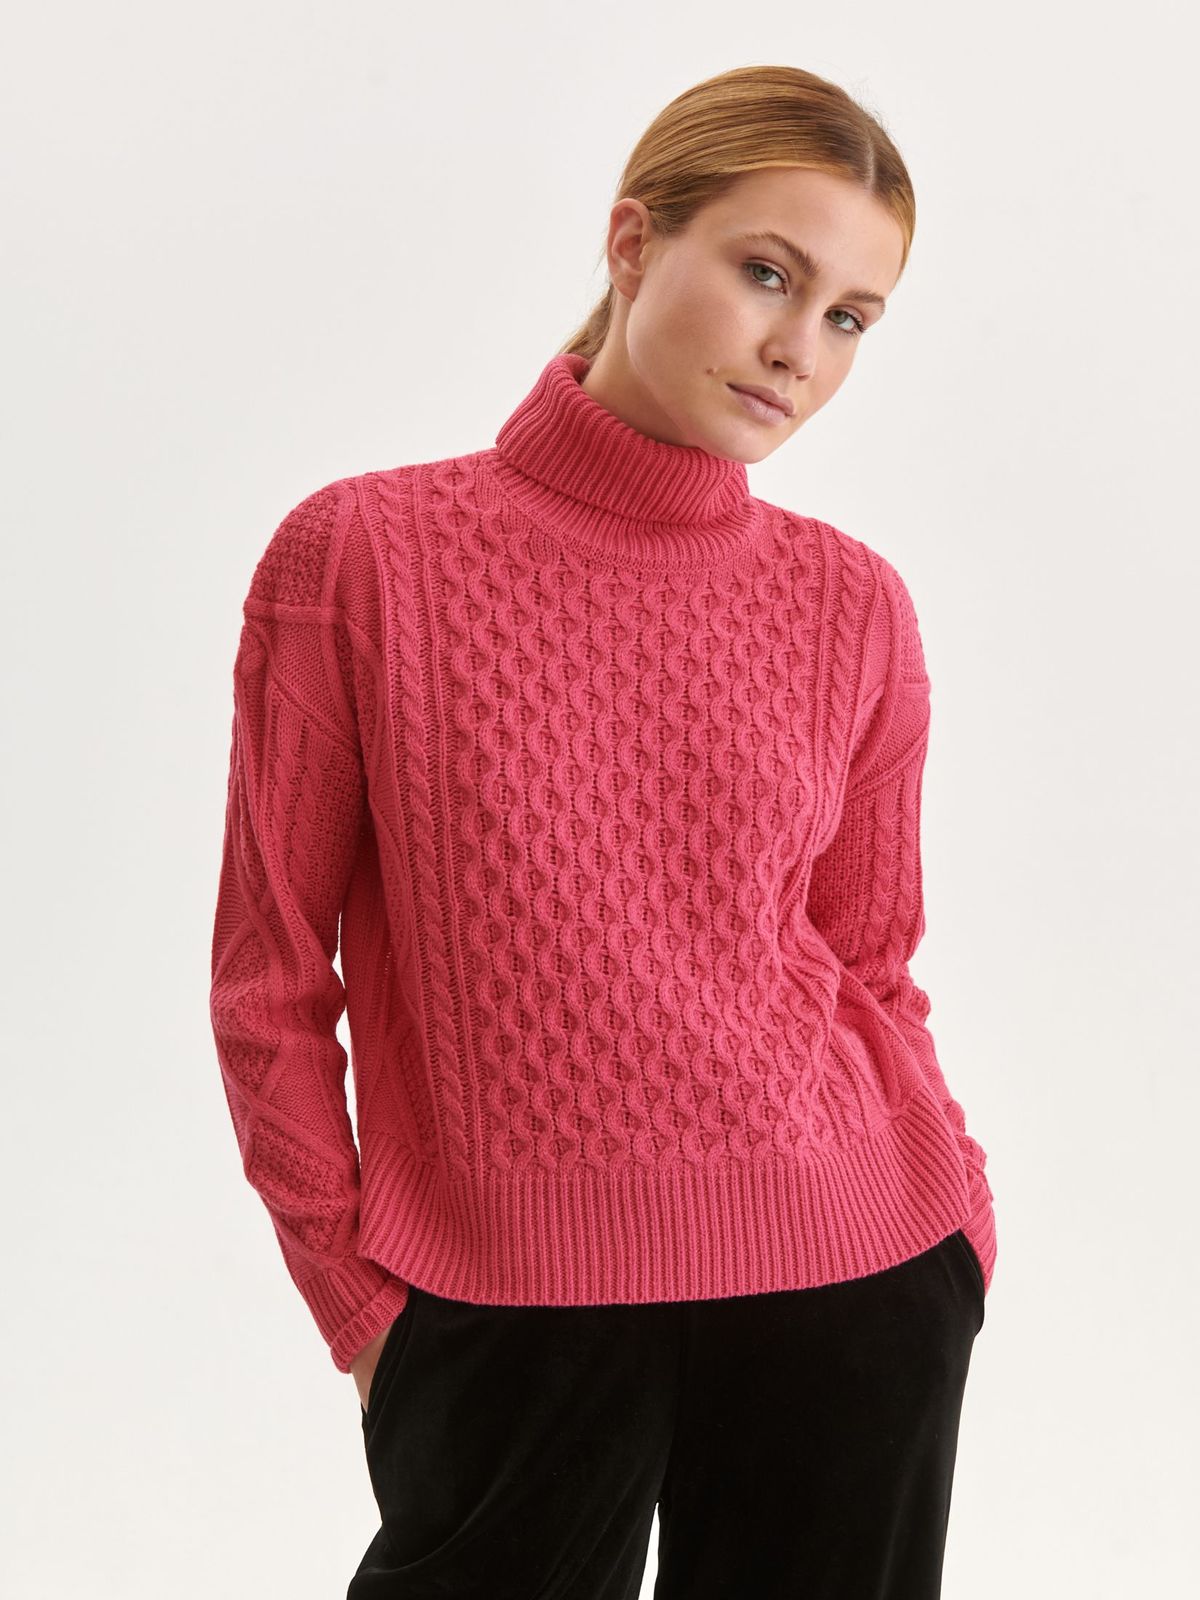 Pink sweater knitted loose fit high collar